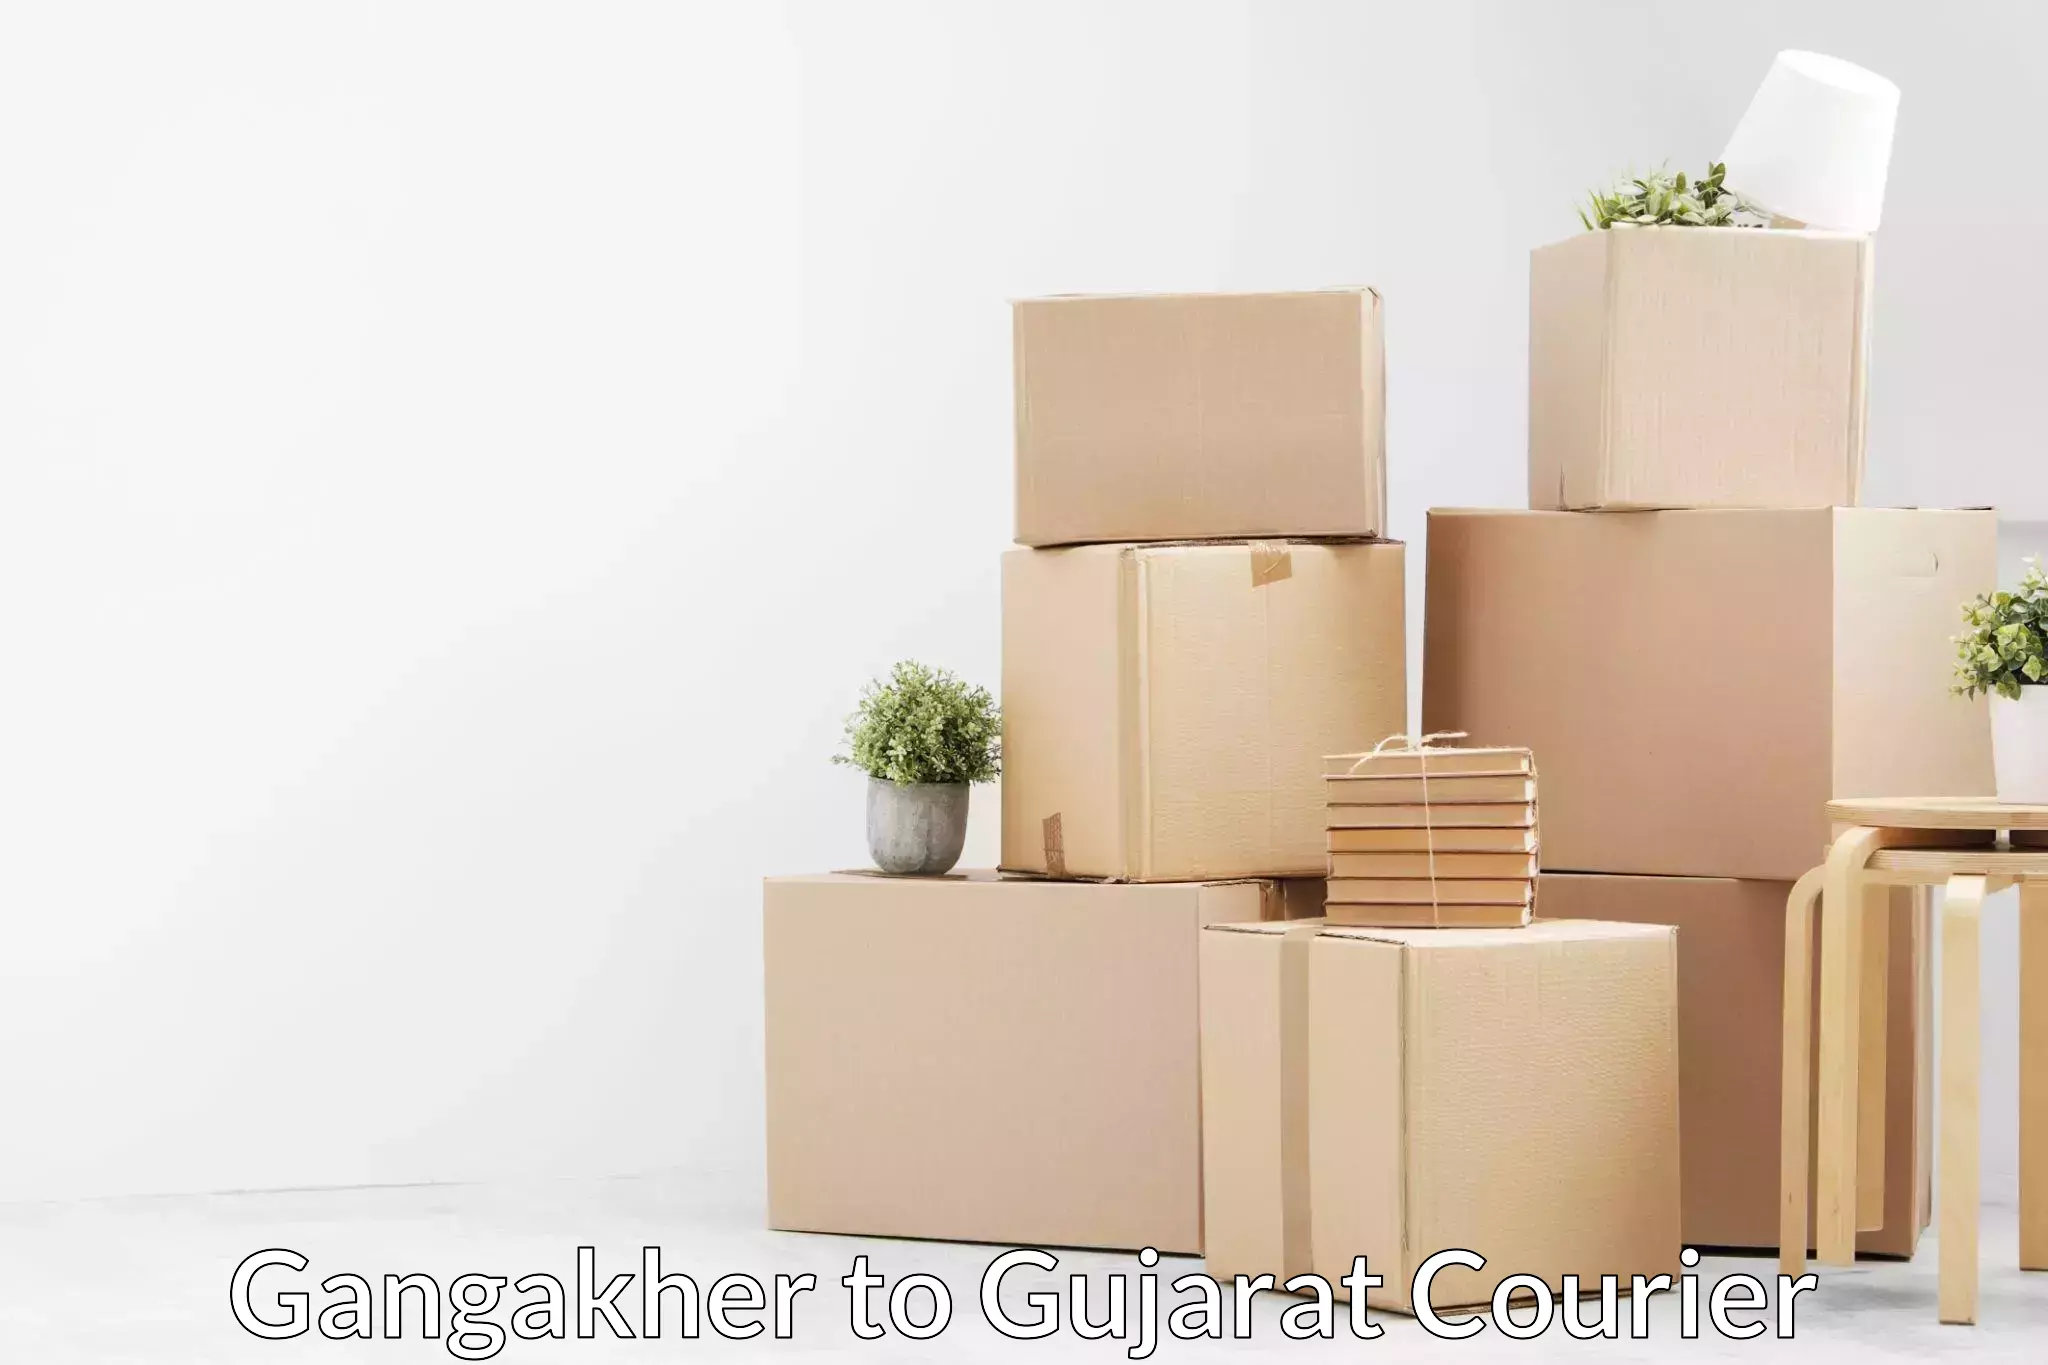 Efficient relocation services Gangakher to Gujarat